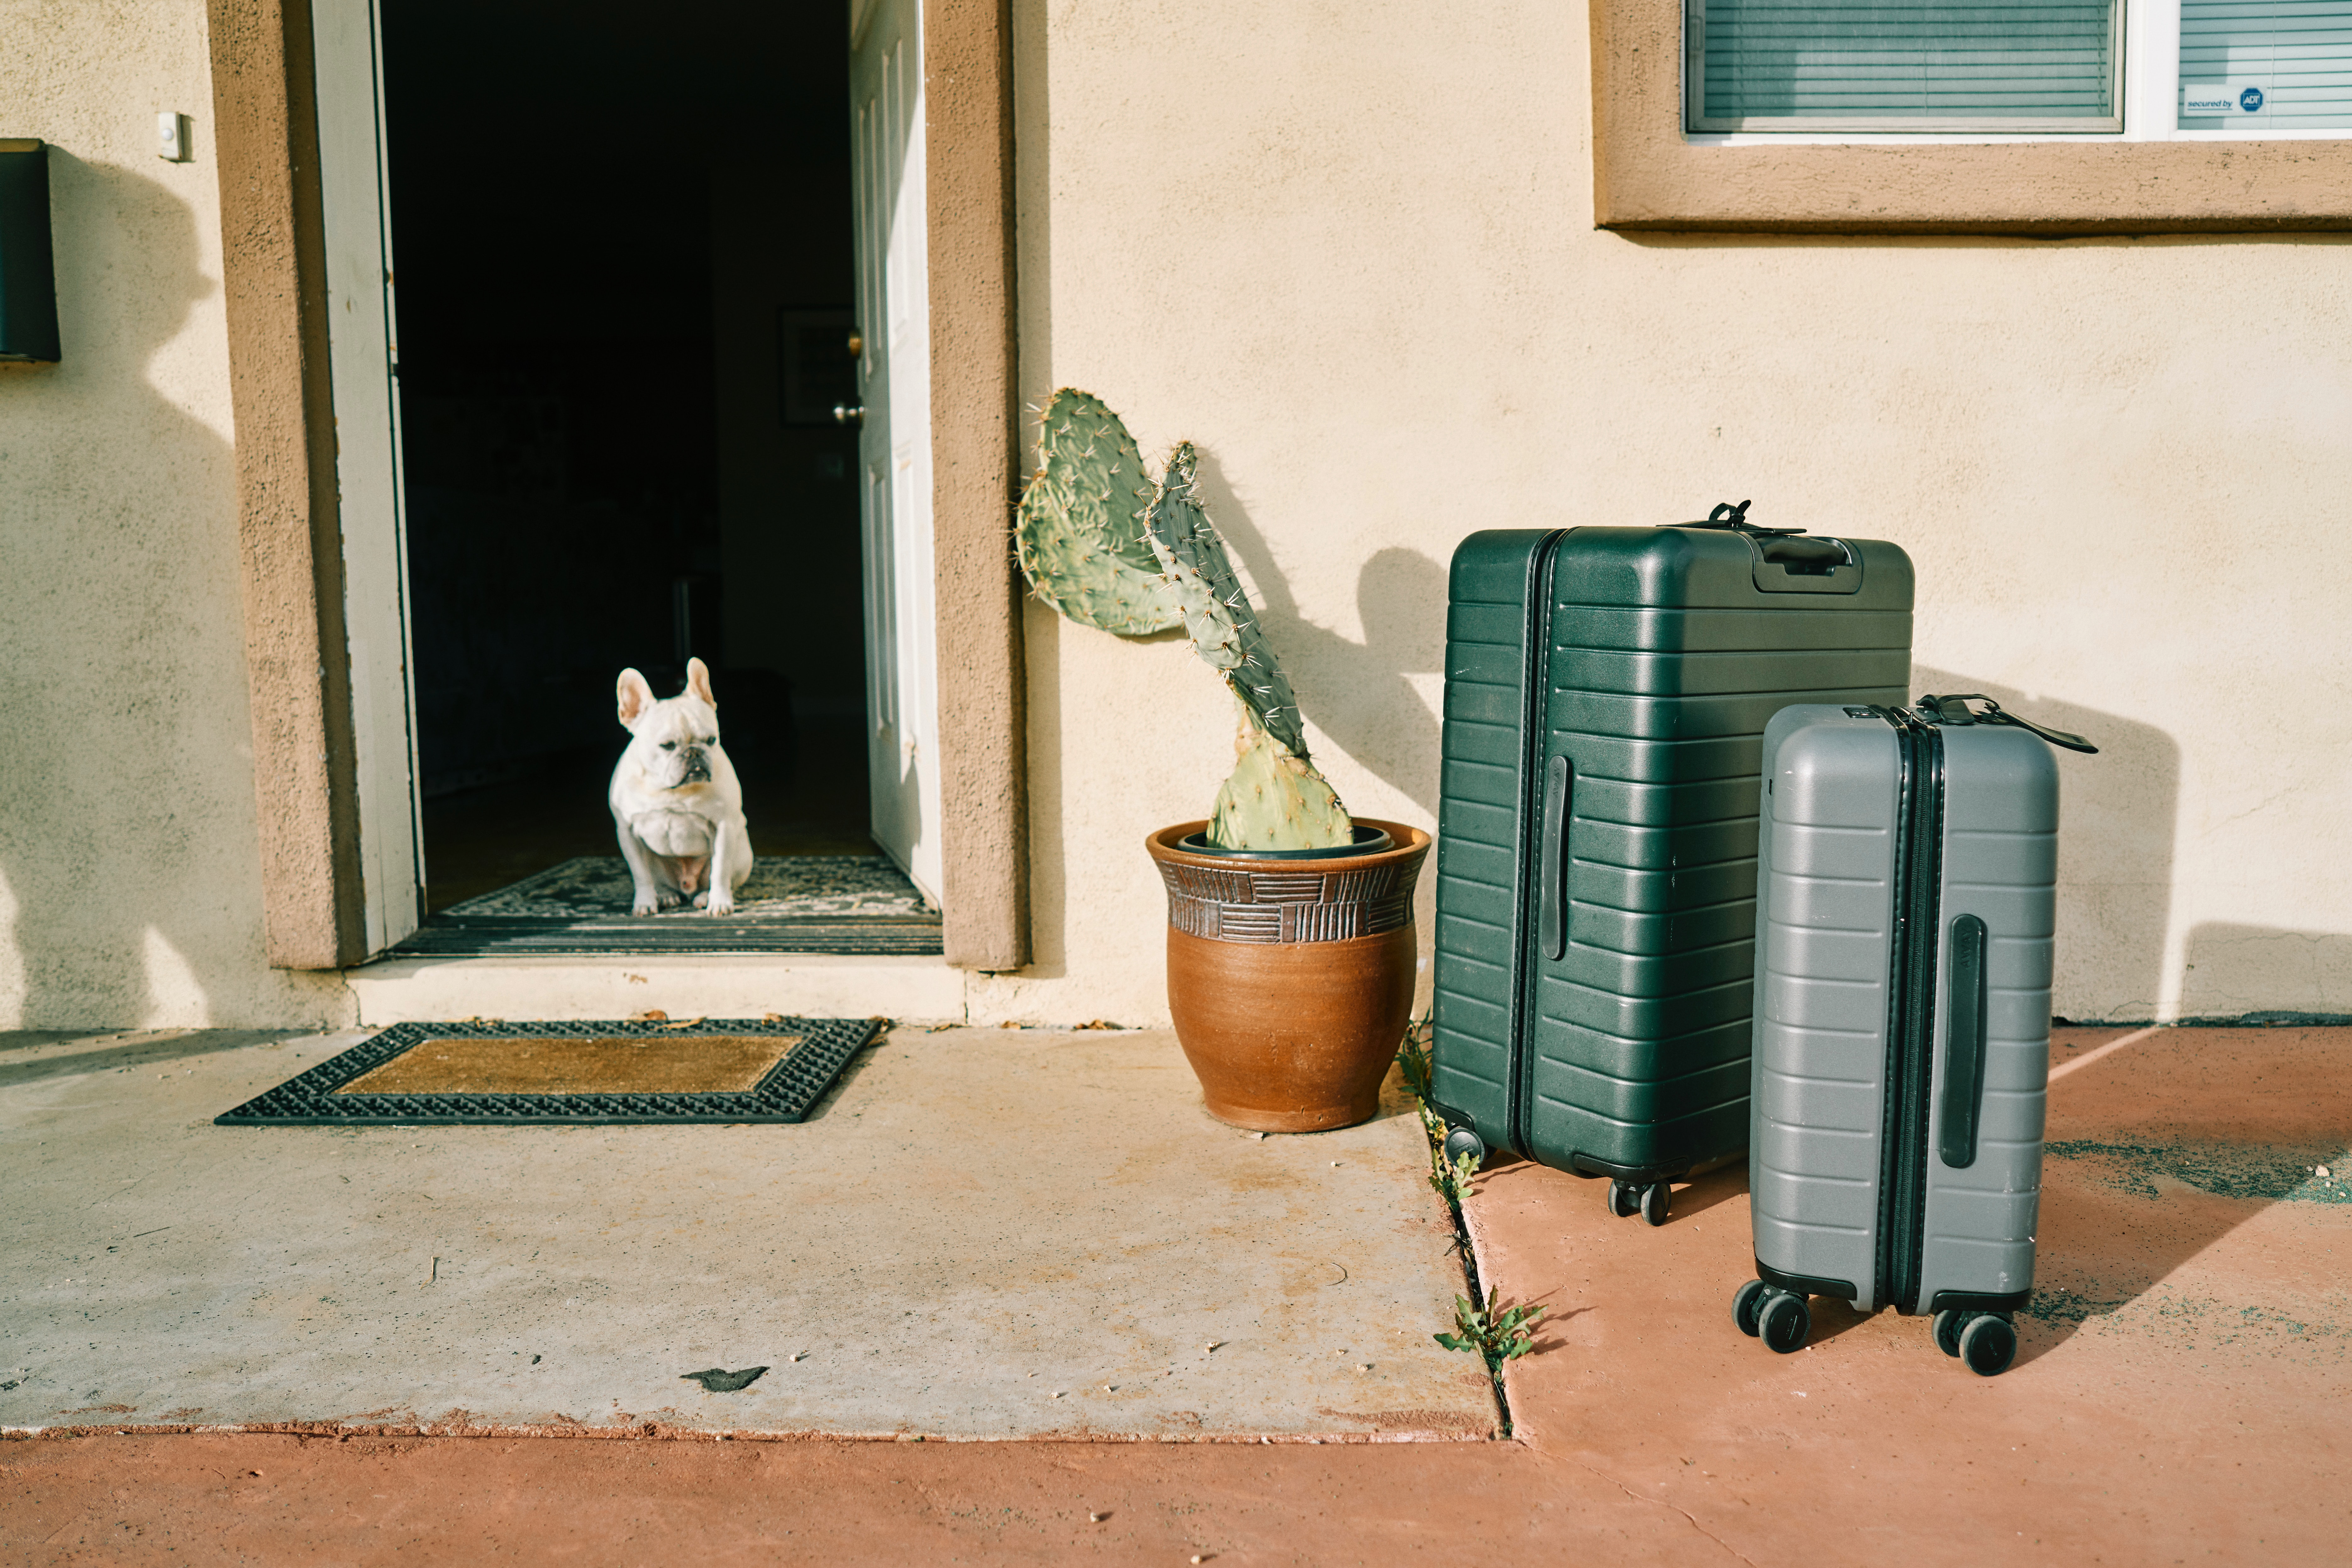 Luggage outside of a vacation home with the door open and a dog waiting.